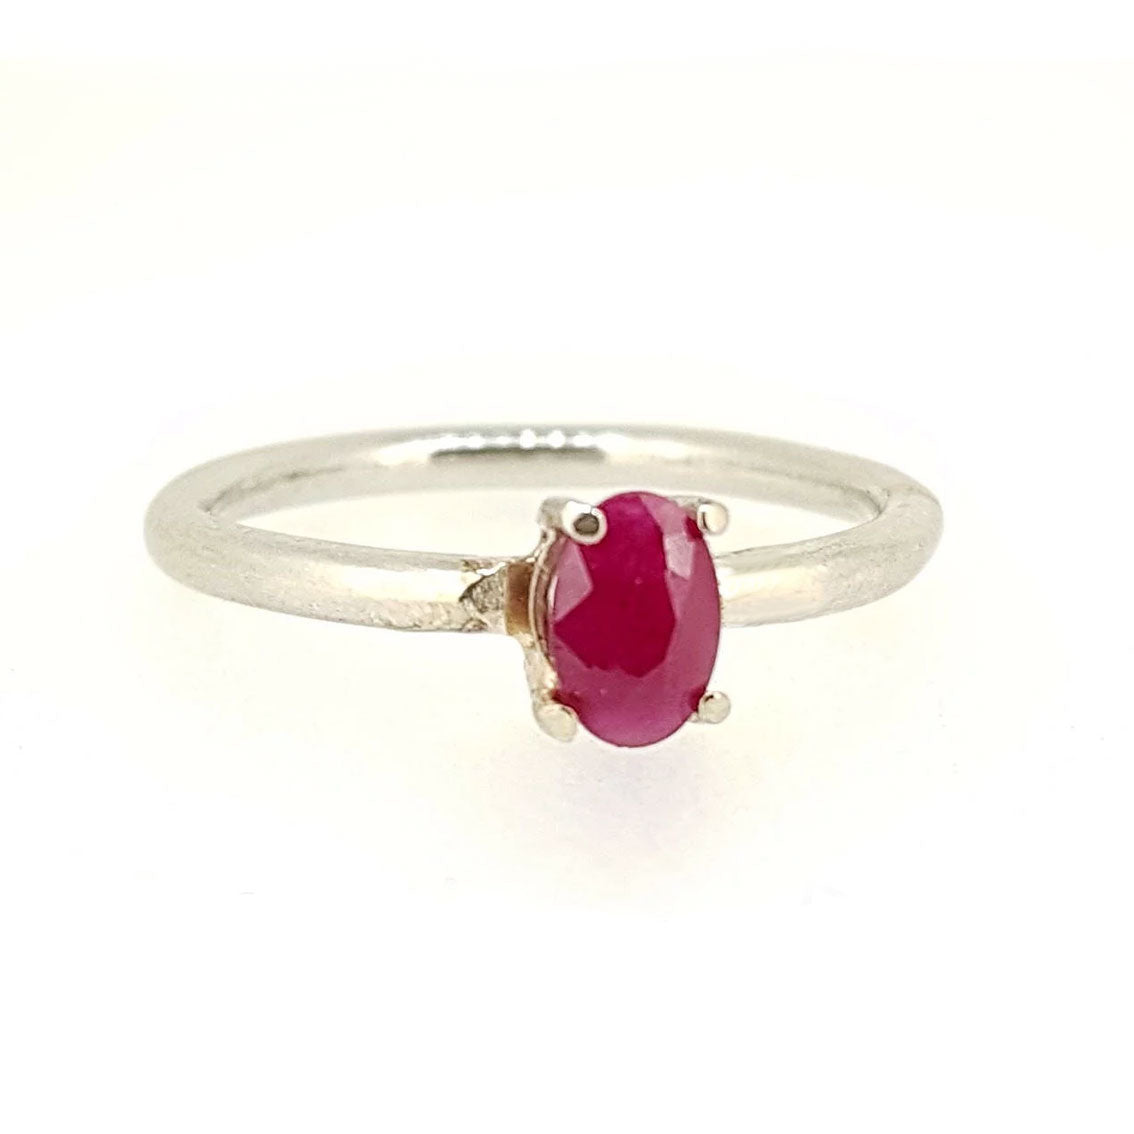 Hepburn in pink. A pretty ruby set in solid white gold.